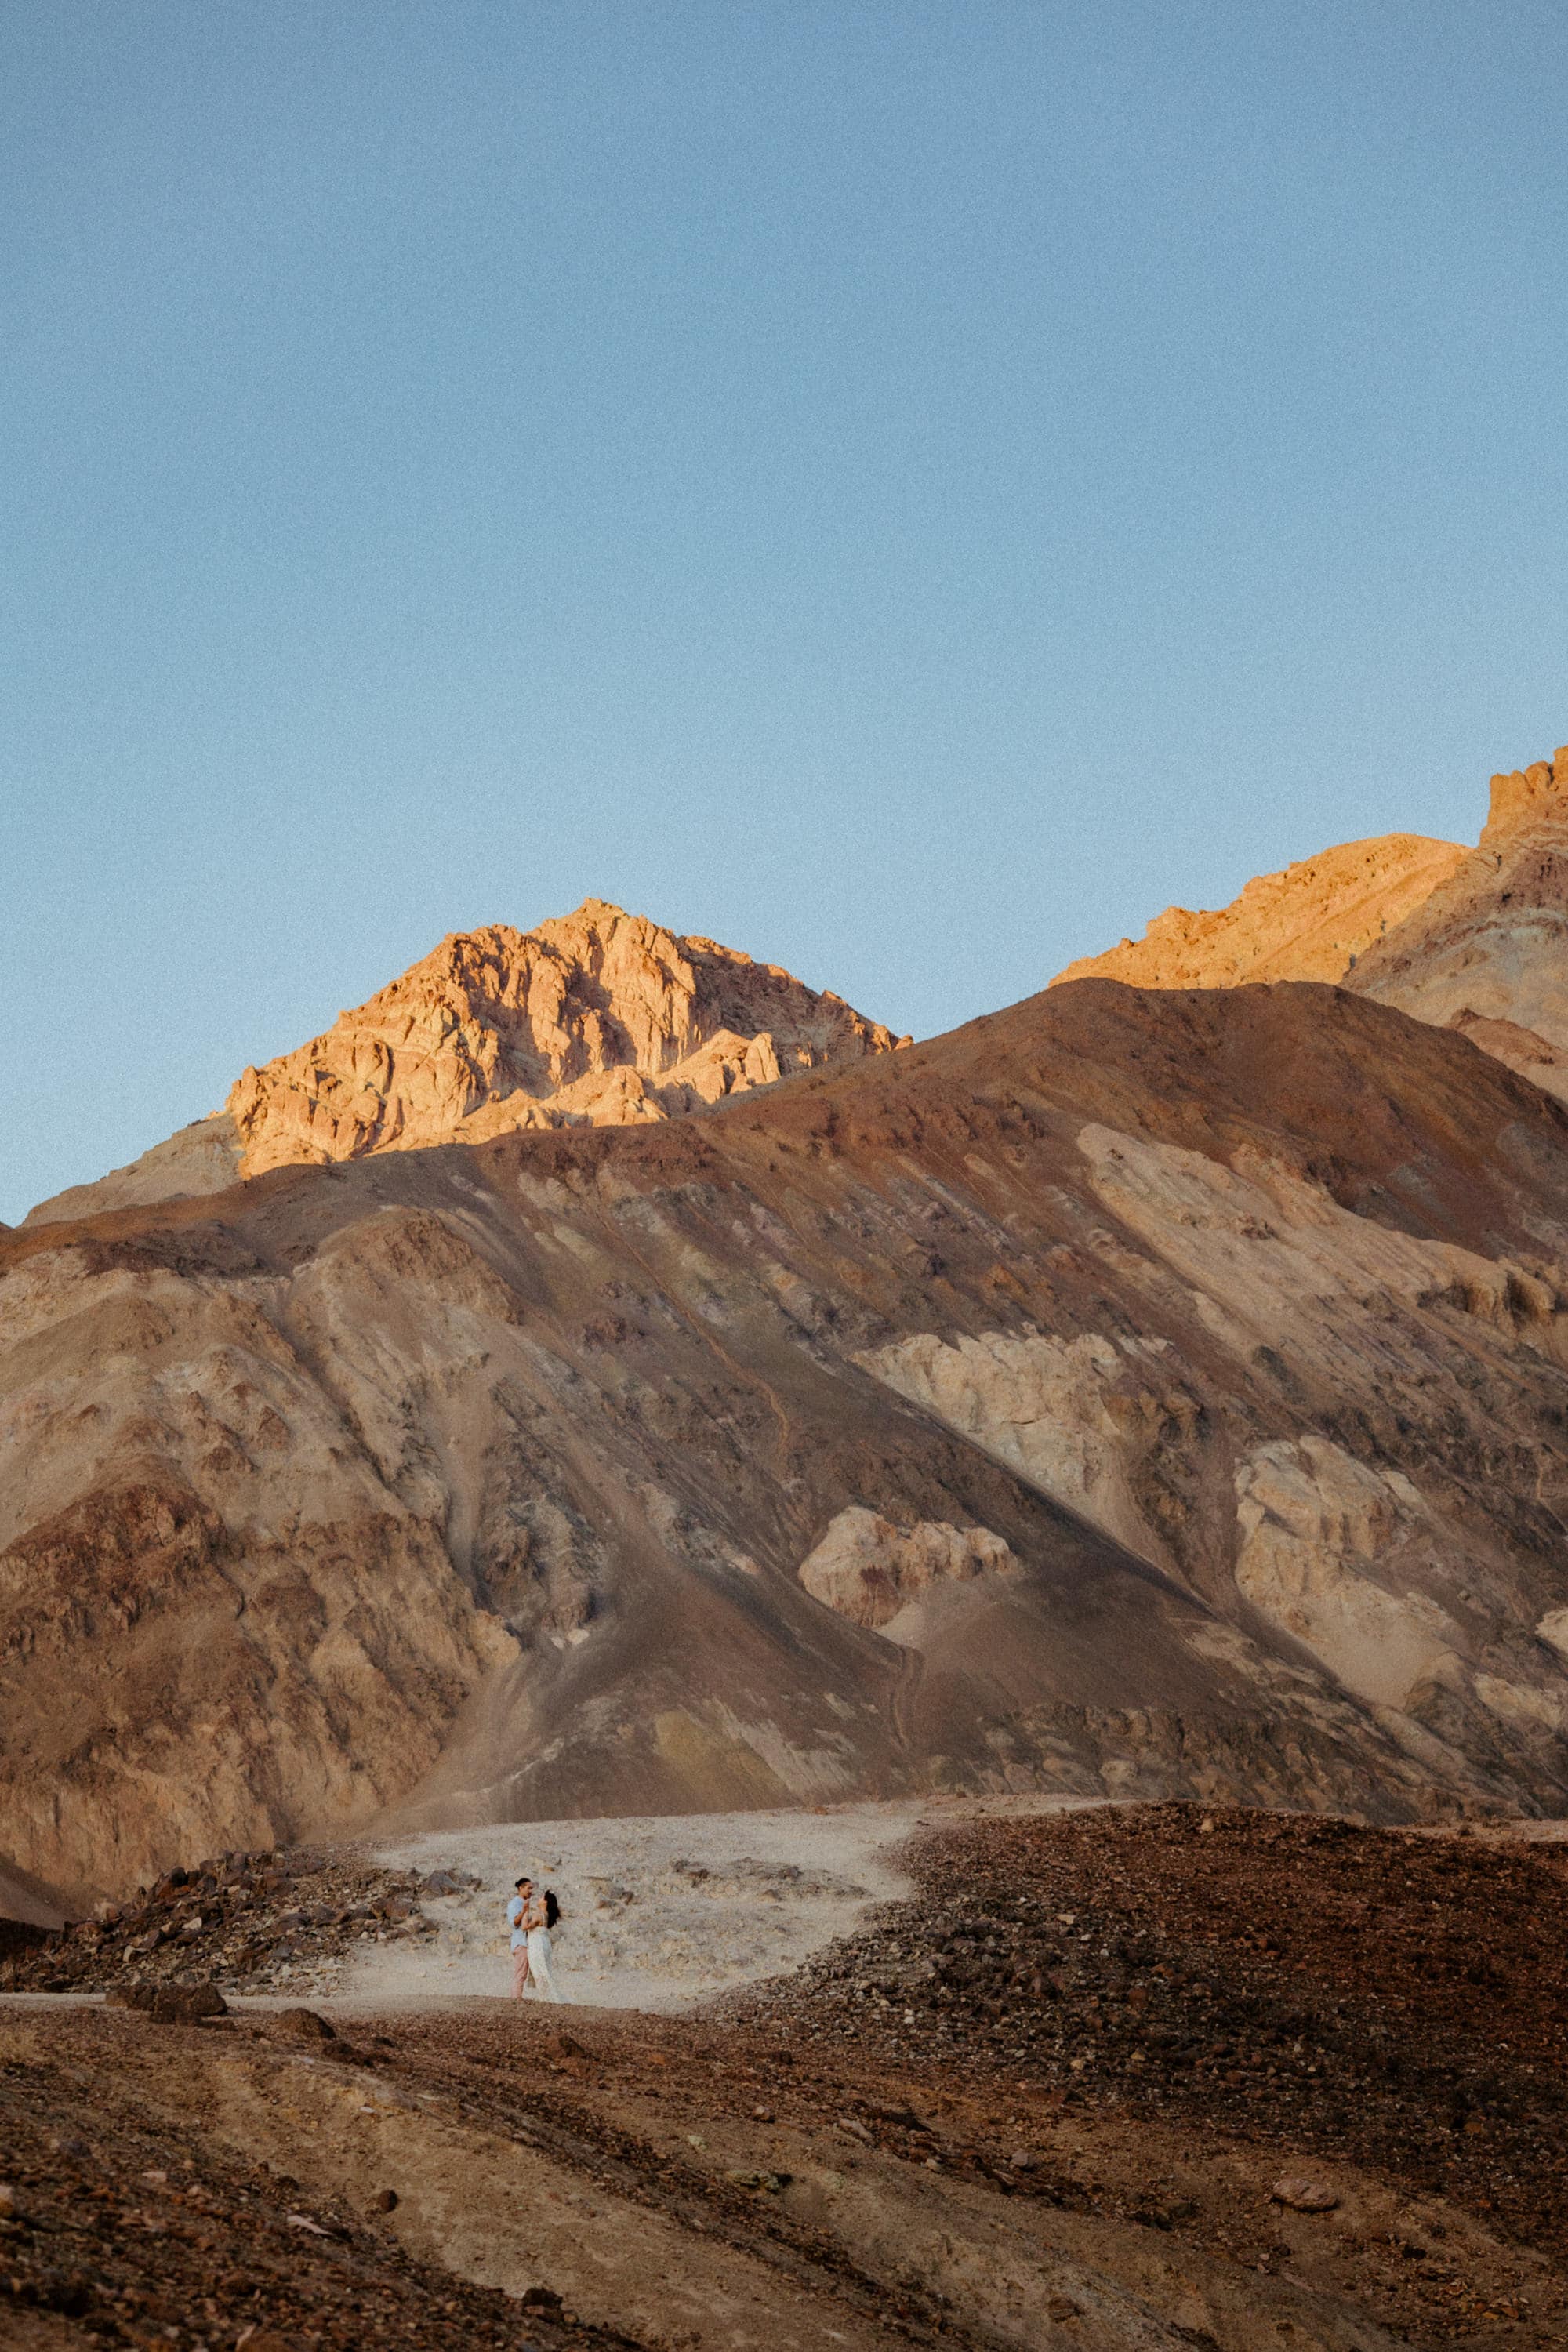 Adventurous spirits venturing into the mesmerizing canyons of Death Valley National Park.